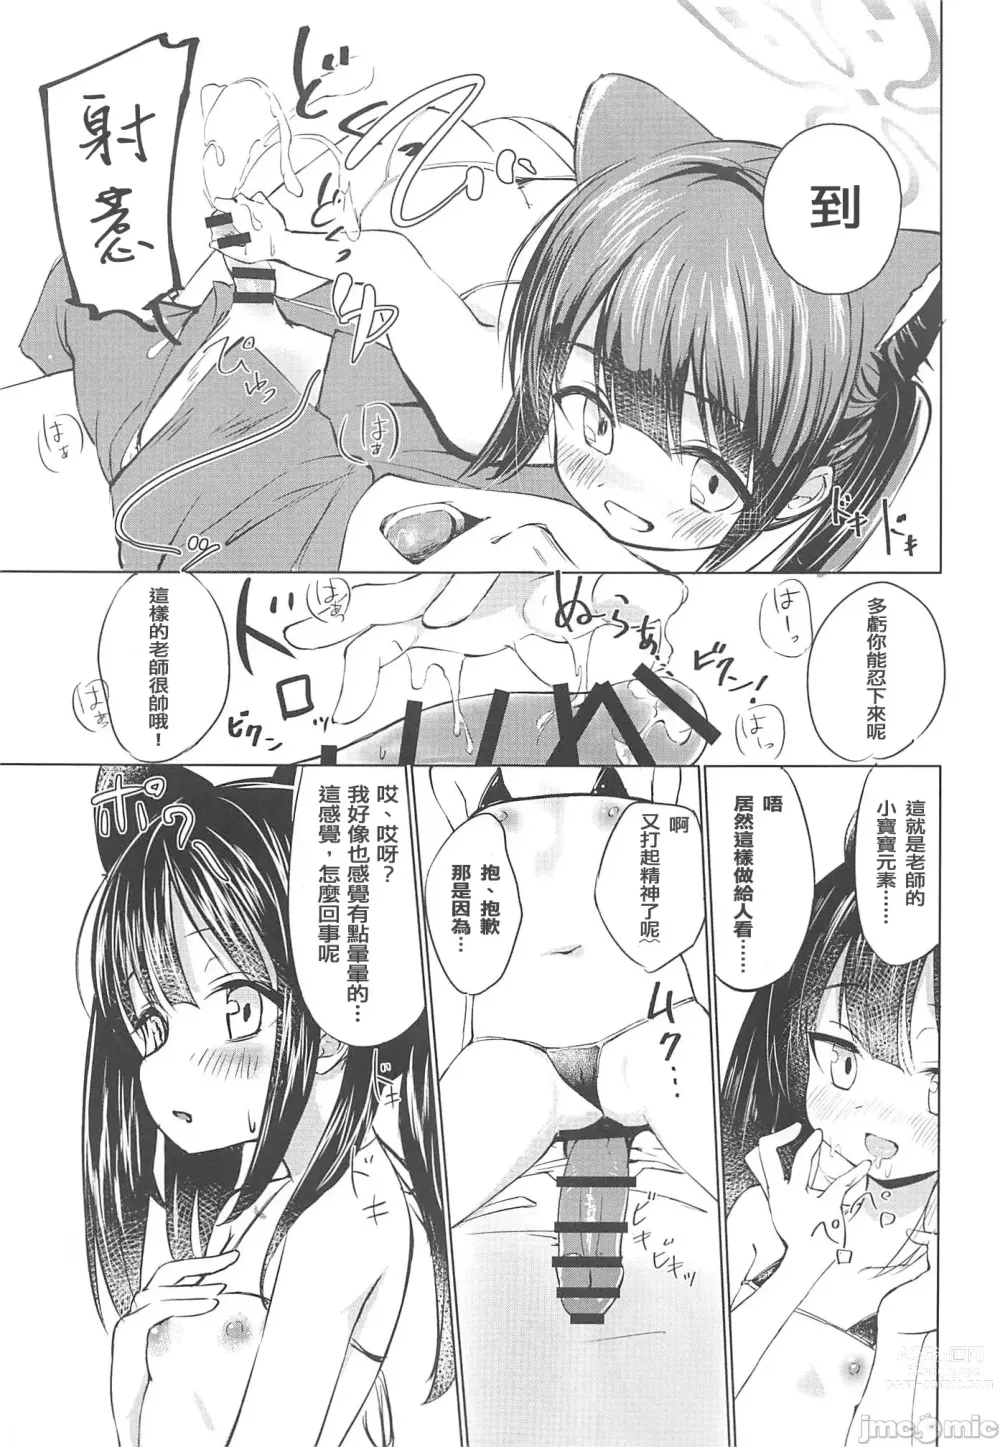 Page 10 of doujinshi Youjo Archive